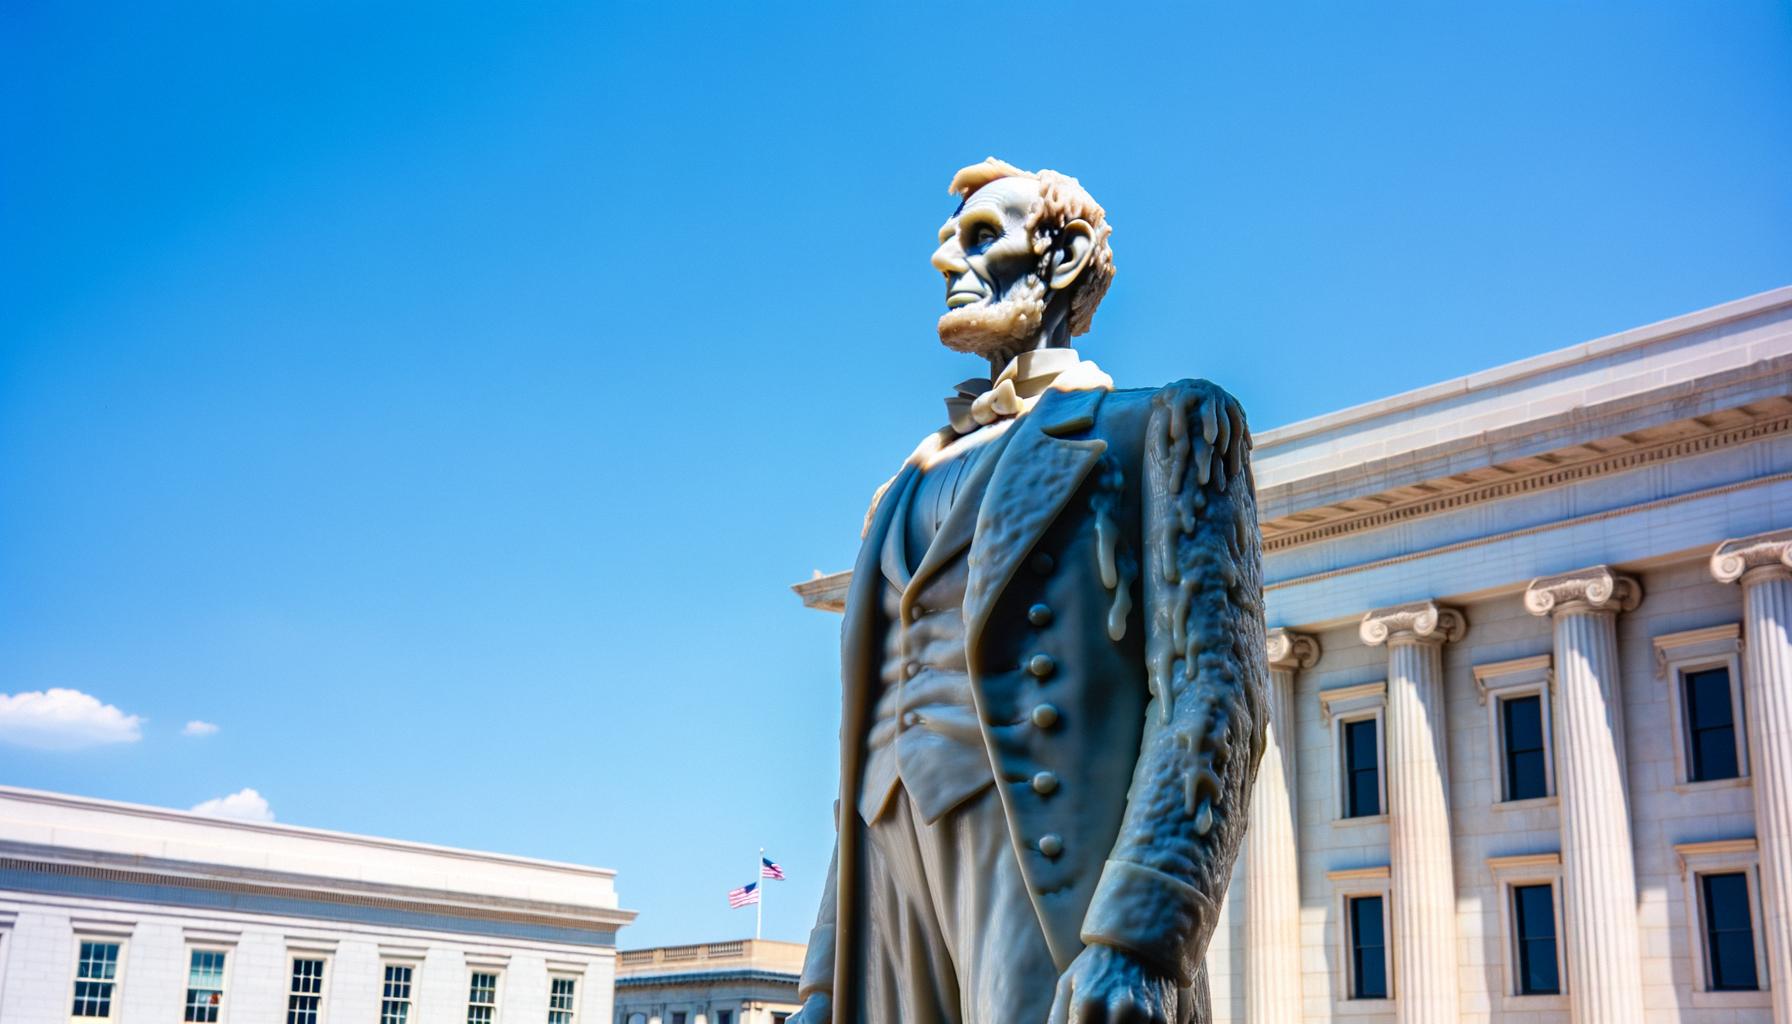 Abraham Lincoln wax statue melted due to Washington DC's heatwave